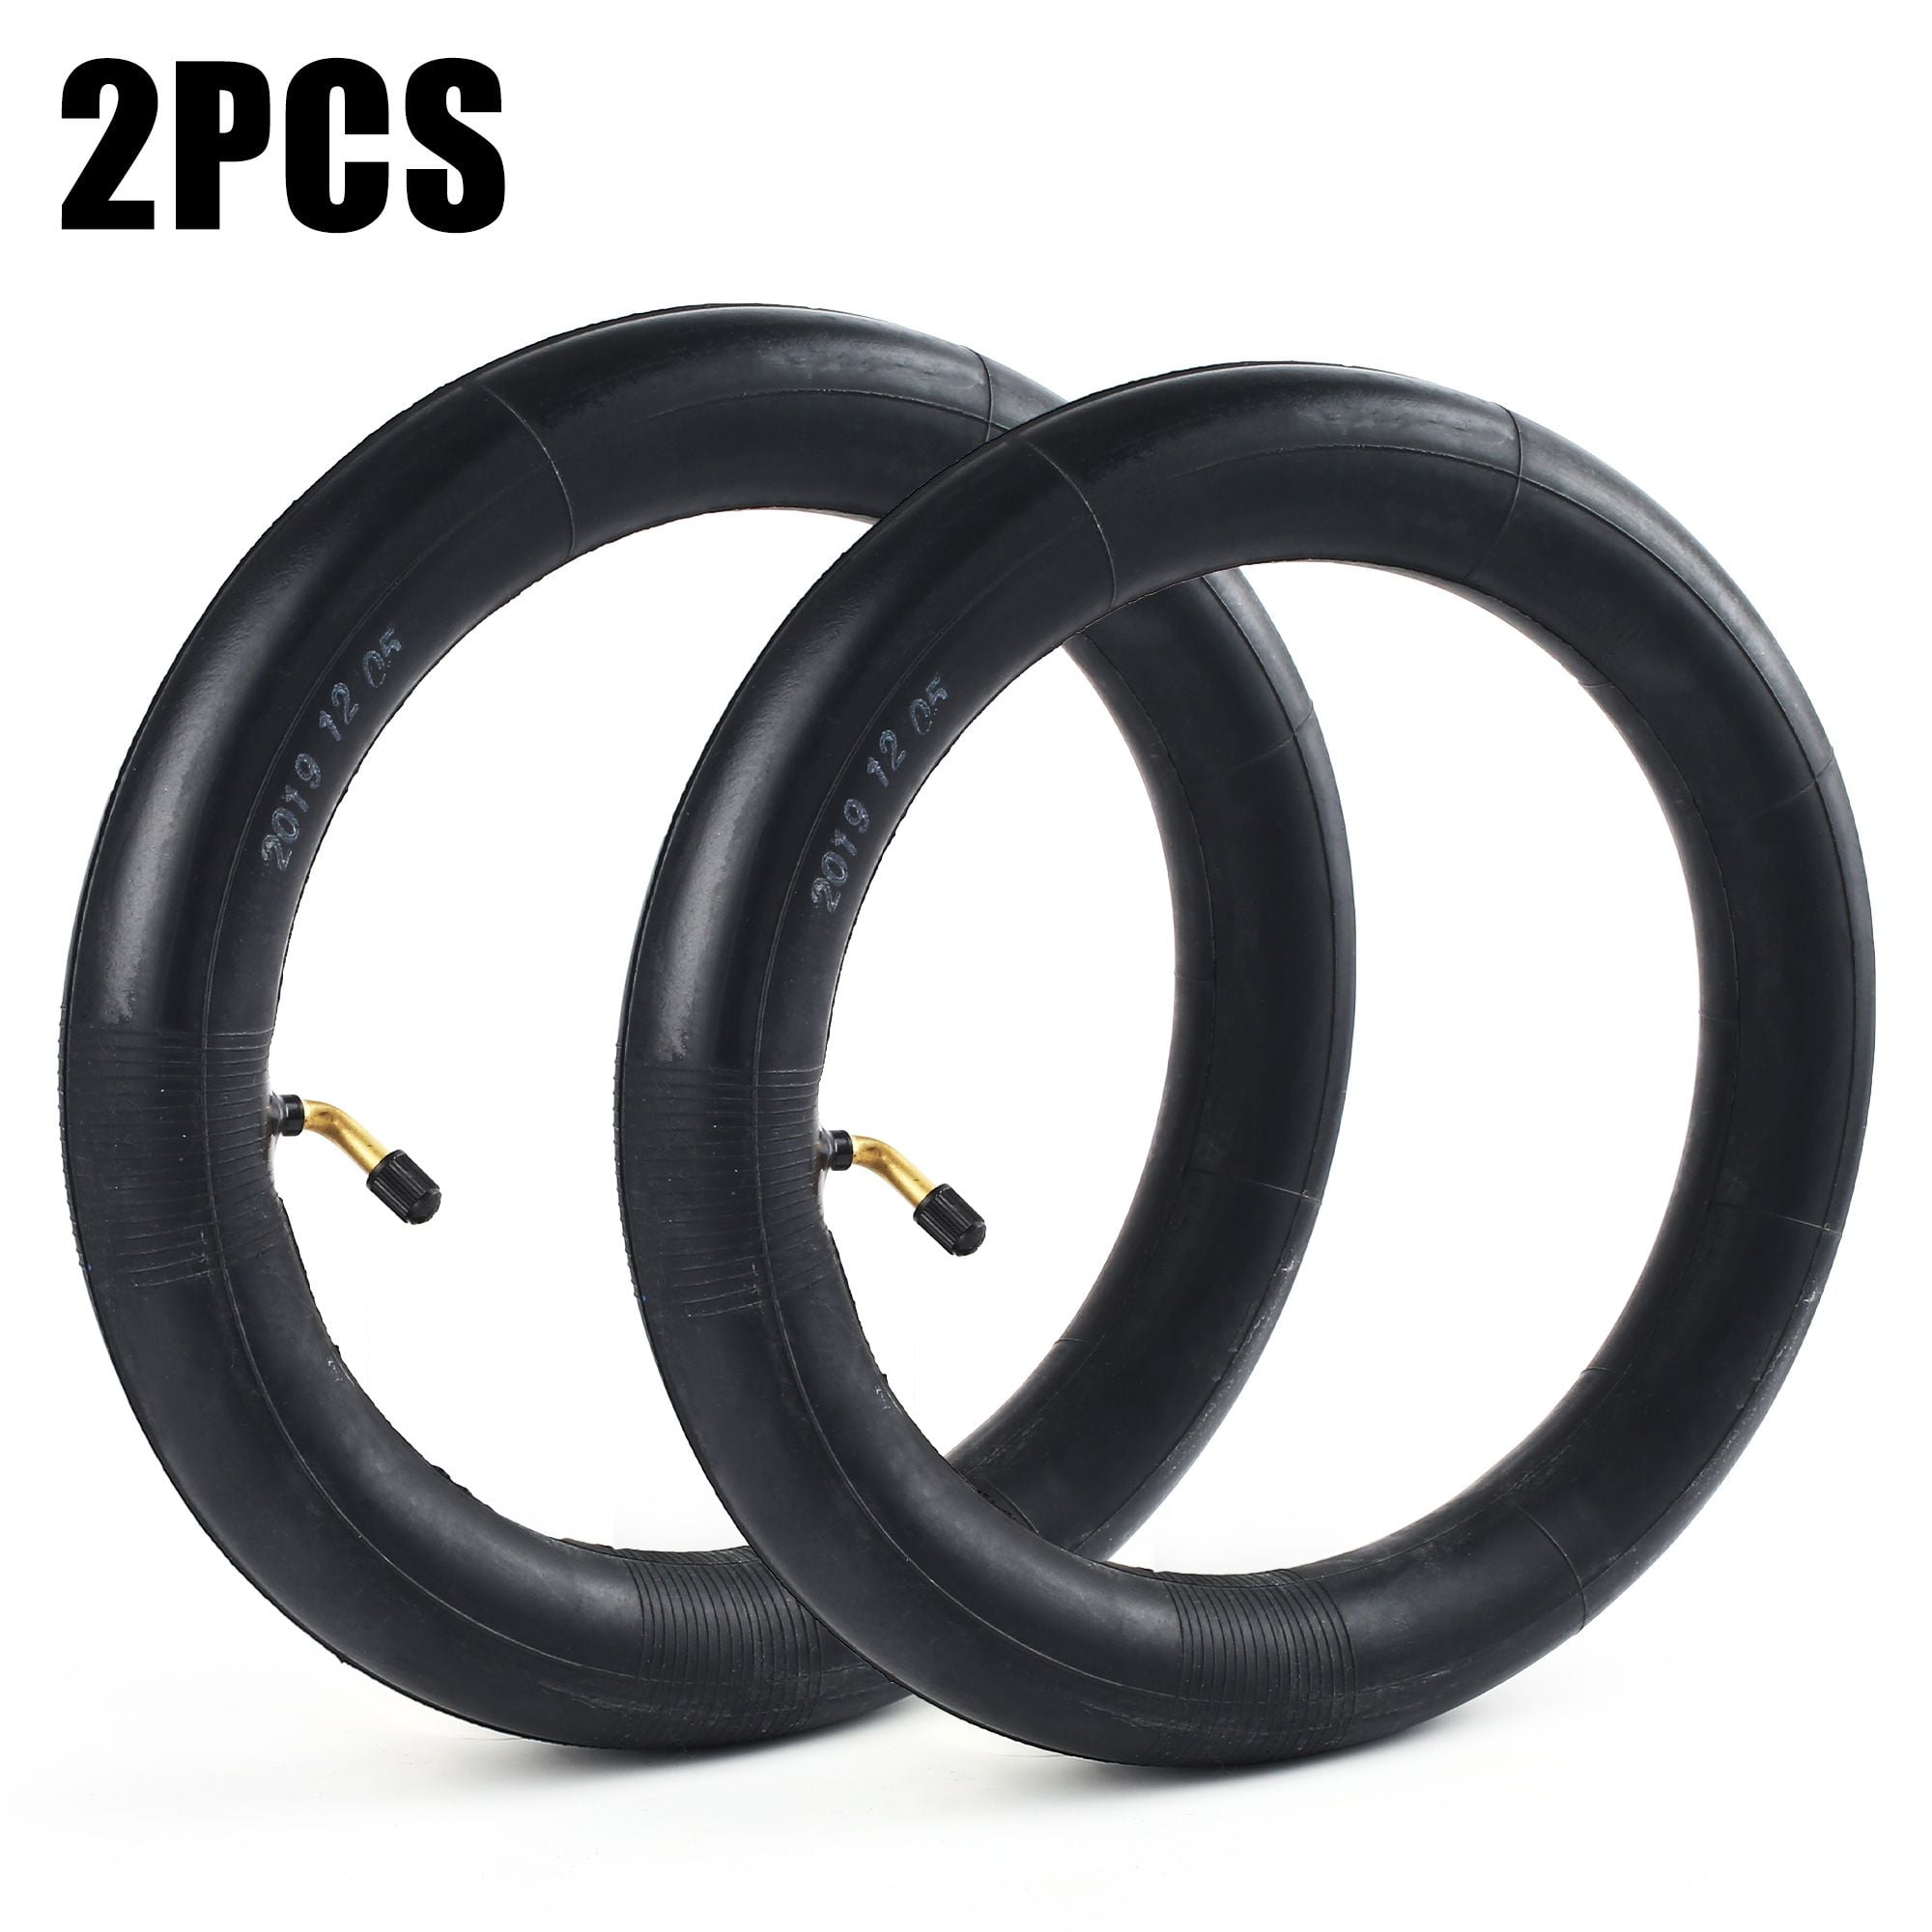 12.5x2.25 Wingsmoto 2 Pack Of 12 1 2 x 2 1 4 Scooter Inner Tube With Angled 